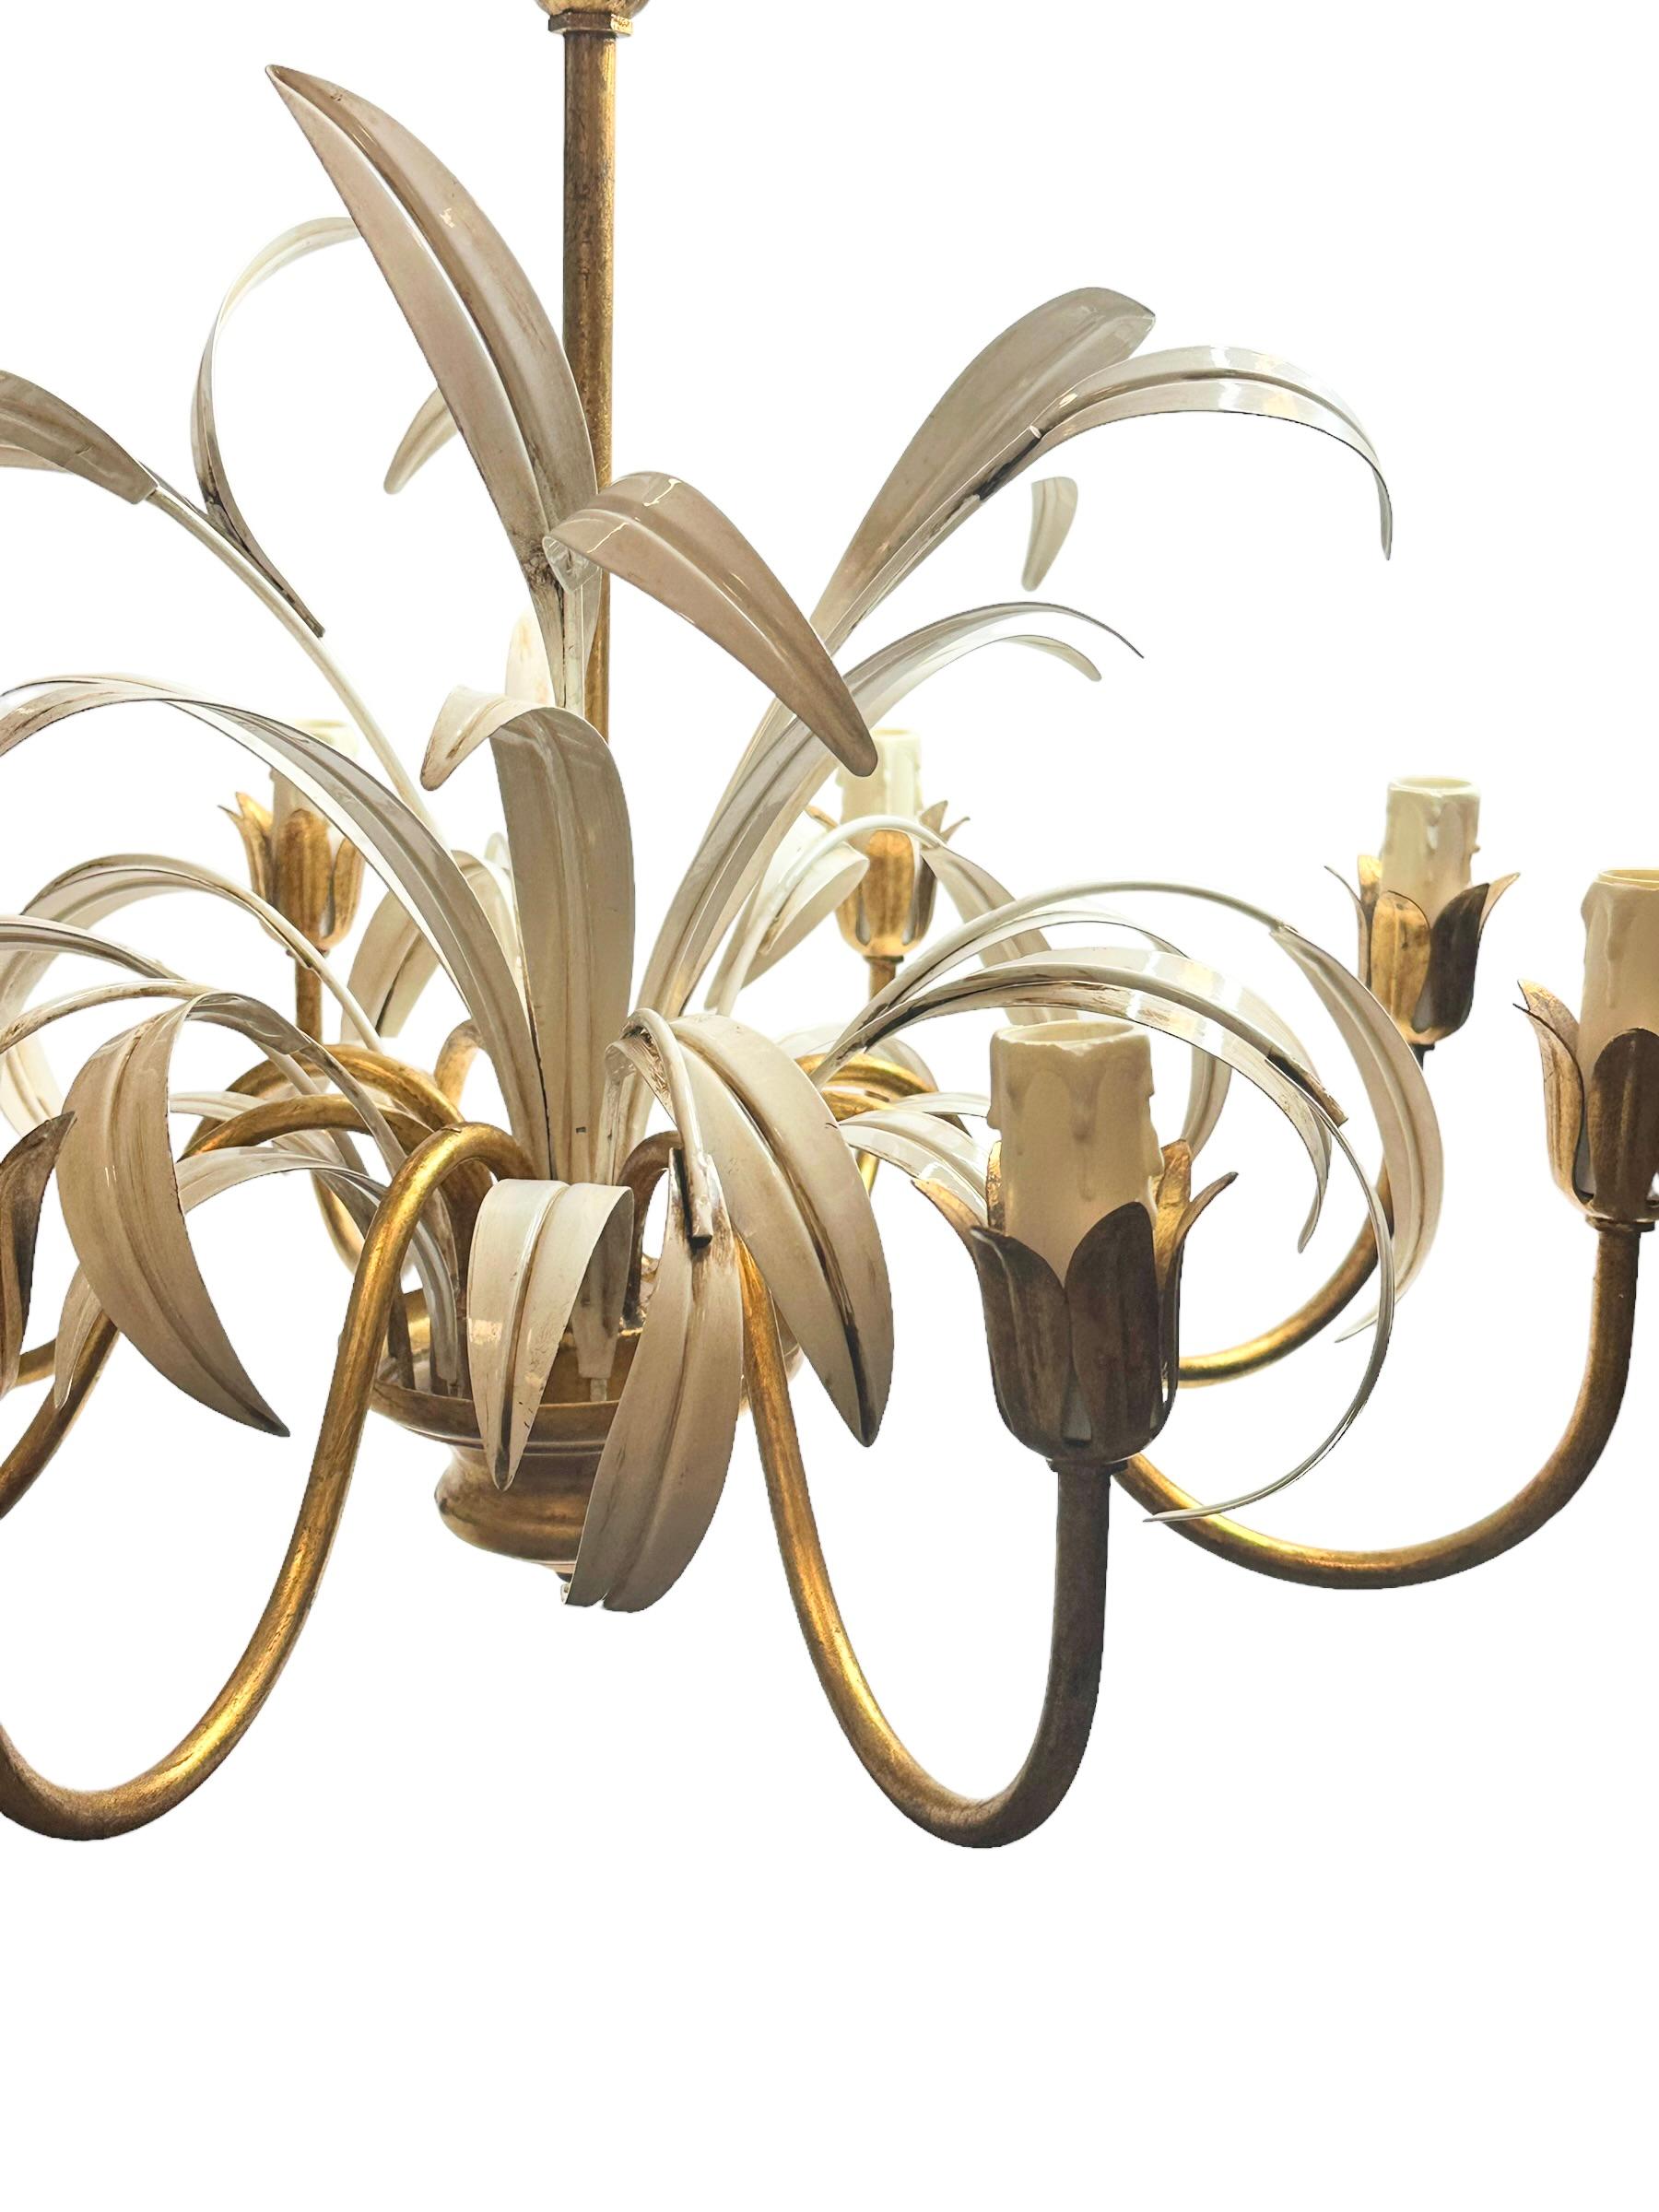 8-Light Gilt Metal Reed Leaf Chandelier Tole Toleware Coco Chanel Style, Italy For Sale 2